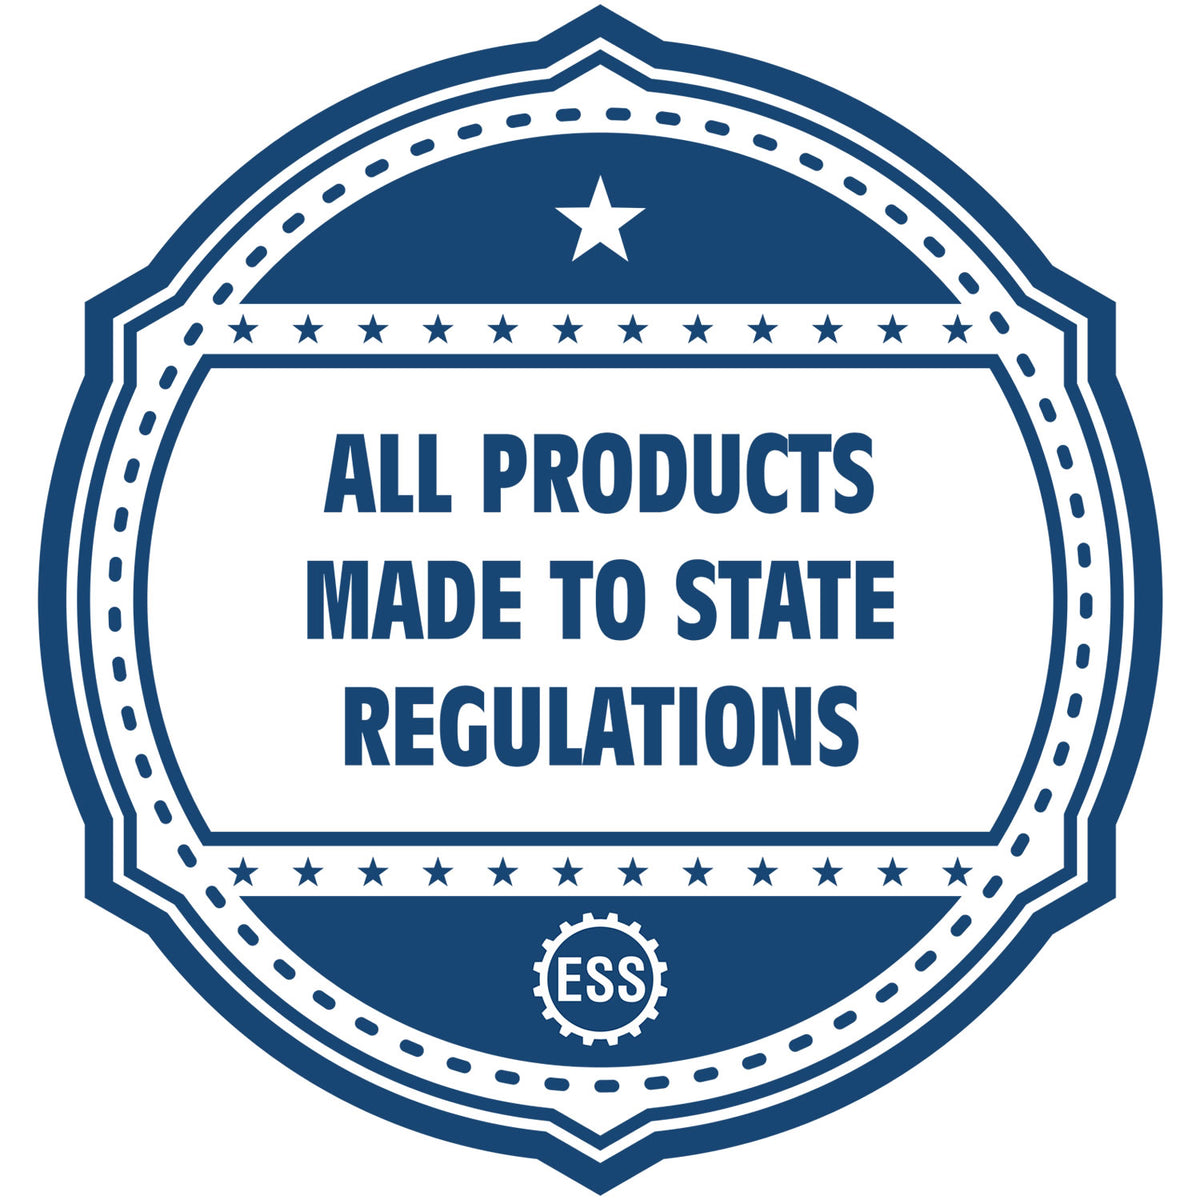 An icon or badge element for the Premium MaxLight Pre-Inked Alabama Engineering Stamp showing that this product is made in compliance with state regulations.